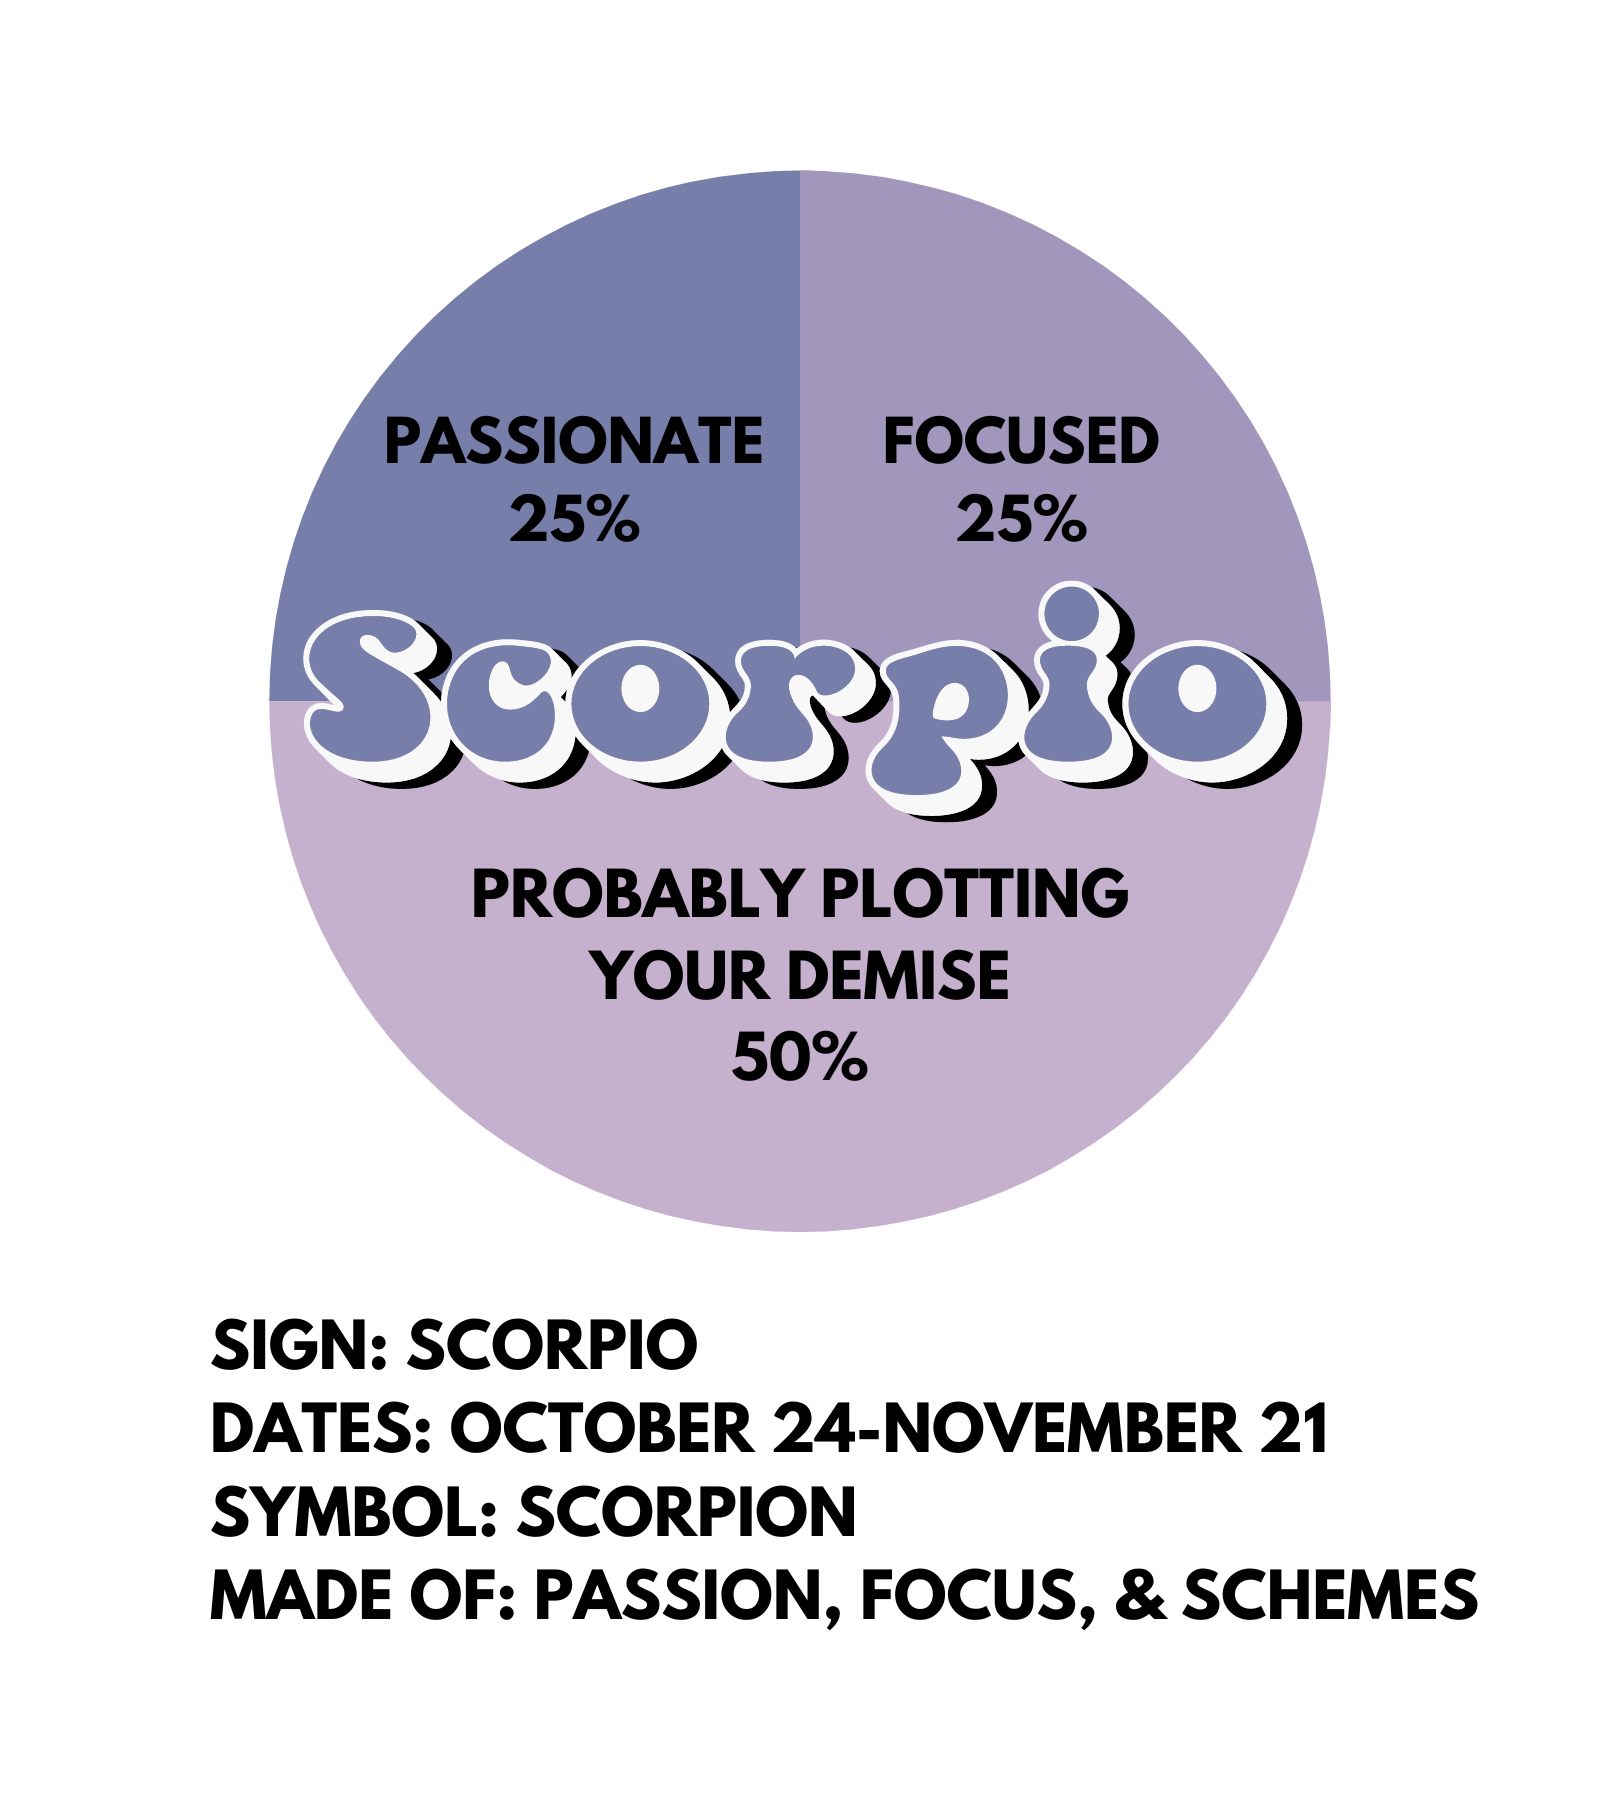 A circular sticker design of a pie chart, with the word Scorpio in the middle. The pie chart is broken up into 3 sections: 50% probably plotting your demise, 25% passionate, 25% focused. Underneath the design there is the text: SIGN: SCORPIO DATES: OCTOBER 24-NOVEMBER 21 SYMBOL: SCORPION MADE OF: PASSION, FOCUS, & SCHEMES